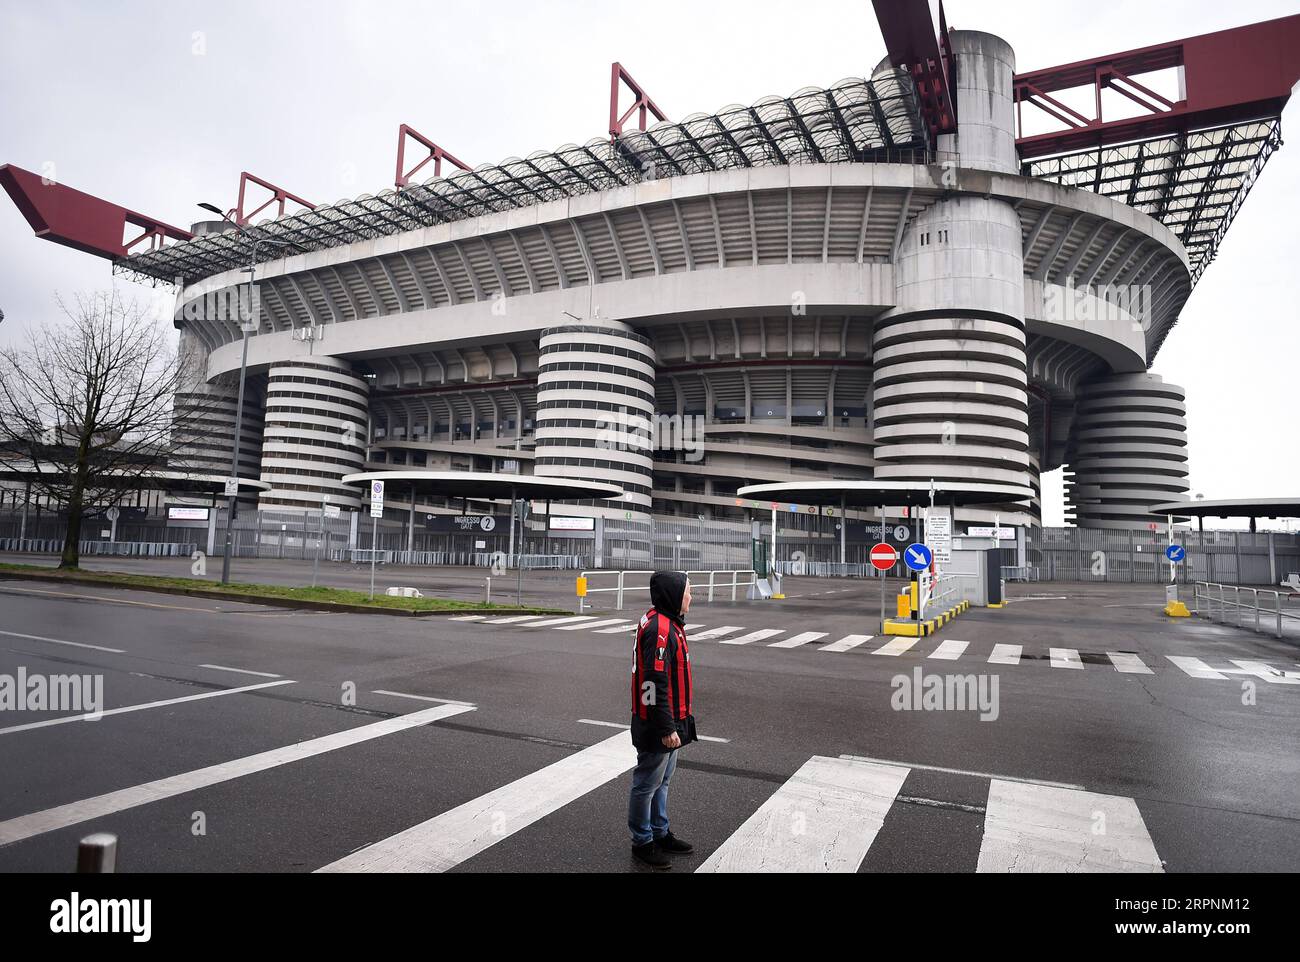 200302 -- MILAN, March 2, 2020 Xinhua -- A fan of AC Milan stands outside the San Siro stadium after a Serie A soccer match between AC Milan and Genoa was postponed due to the recent coronavirus outbreak in Milan, Italy, March 1, 2020. The number of Italians infected by the coronavirus continues to accelerate, Giovanni Rezza, head of the Italian High Institute of Health s Department of Infectious Diseases, said Sunday, adding that the country was at least a week away from seeing a peak in the outbreak. According to Angelo Borrelli, Civil Protection Department chief and Extraordinary Commission Stock Photo